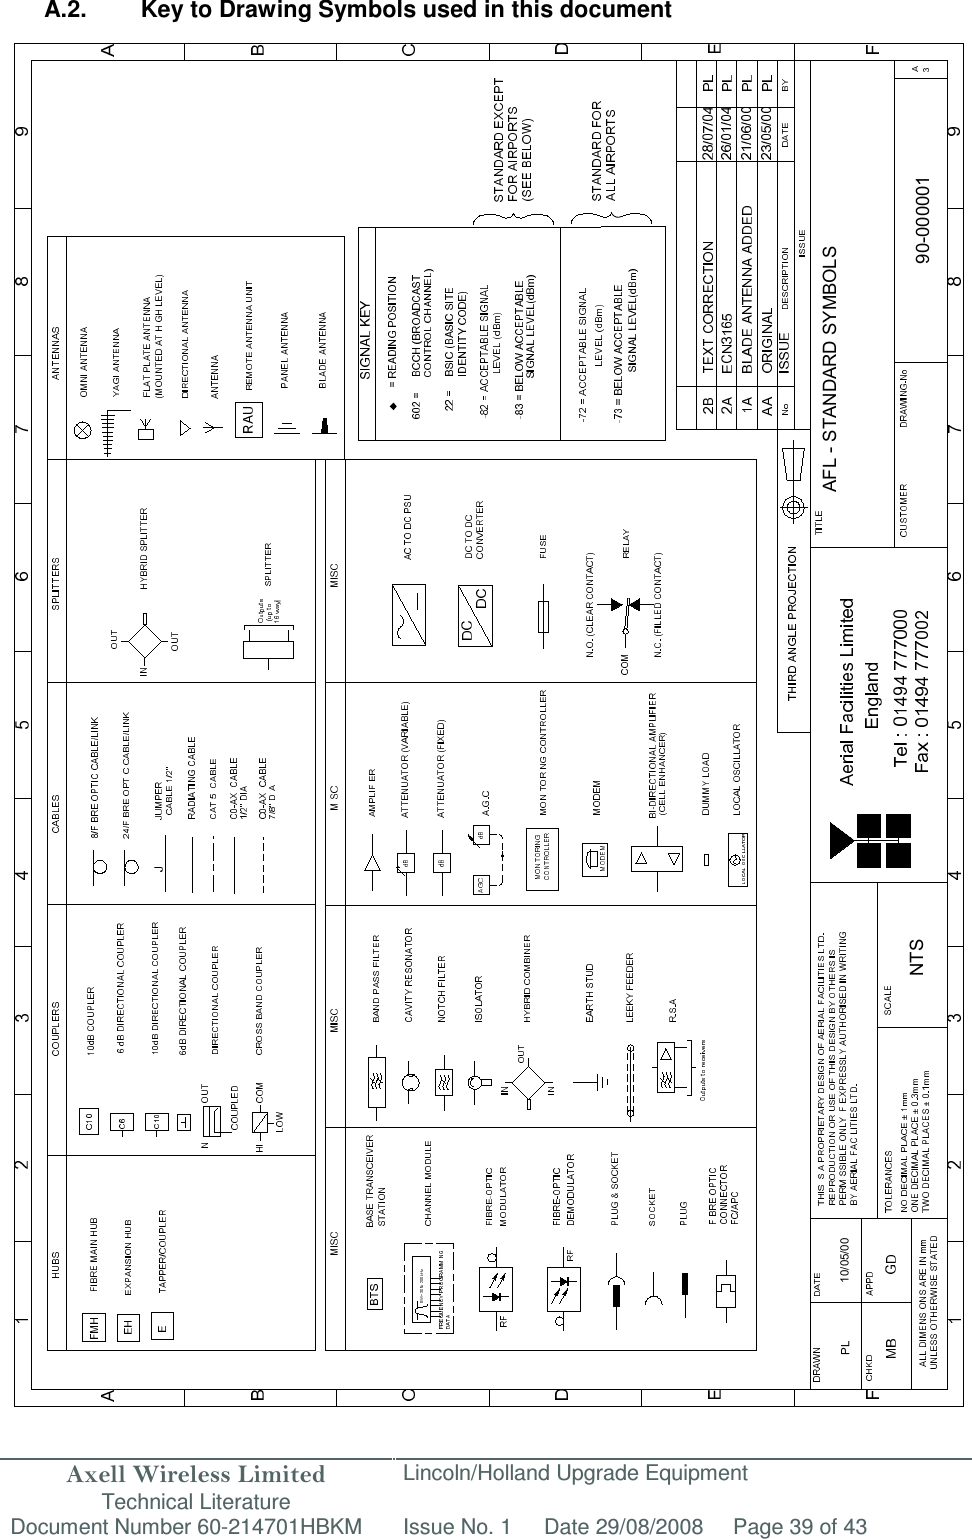 Axell Wireless Limited Technical Literature Lincoln/Holland Upgrade Equipment Document Number 60-214701HBKM Issue No. 1 Date 29/08/2008 Page 39 of 43  90-000001AANTSPL 10/05/00AFL - STANDARD SYMBOLS A.2.  Key to Drawing Symbols used in this document                                                       